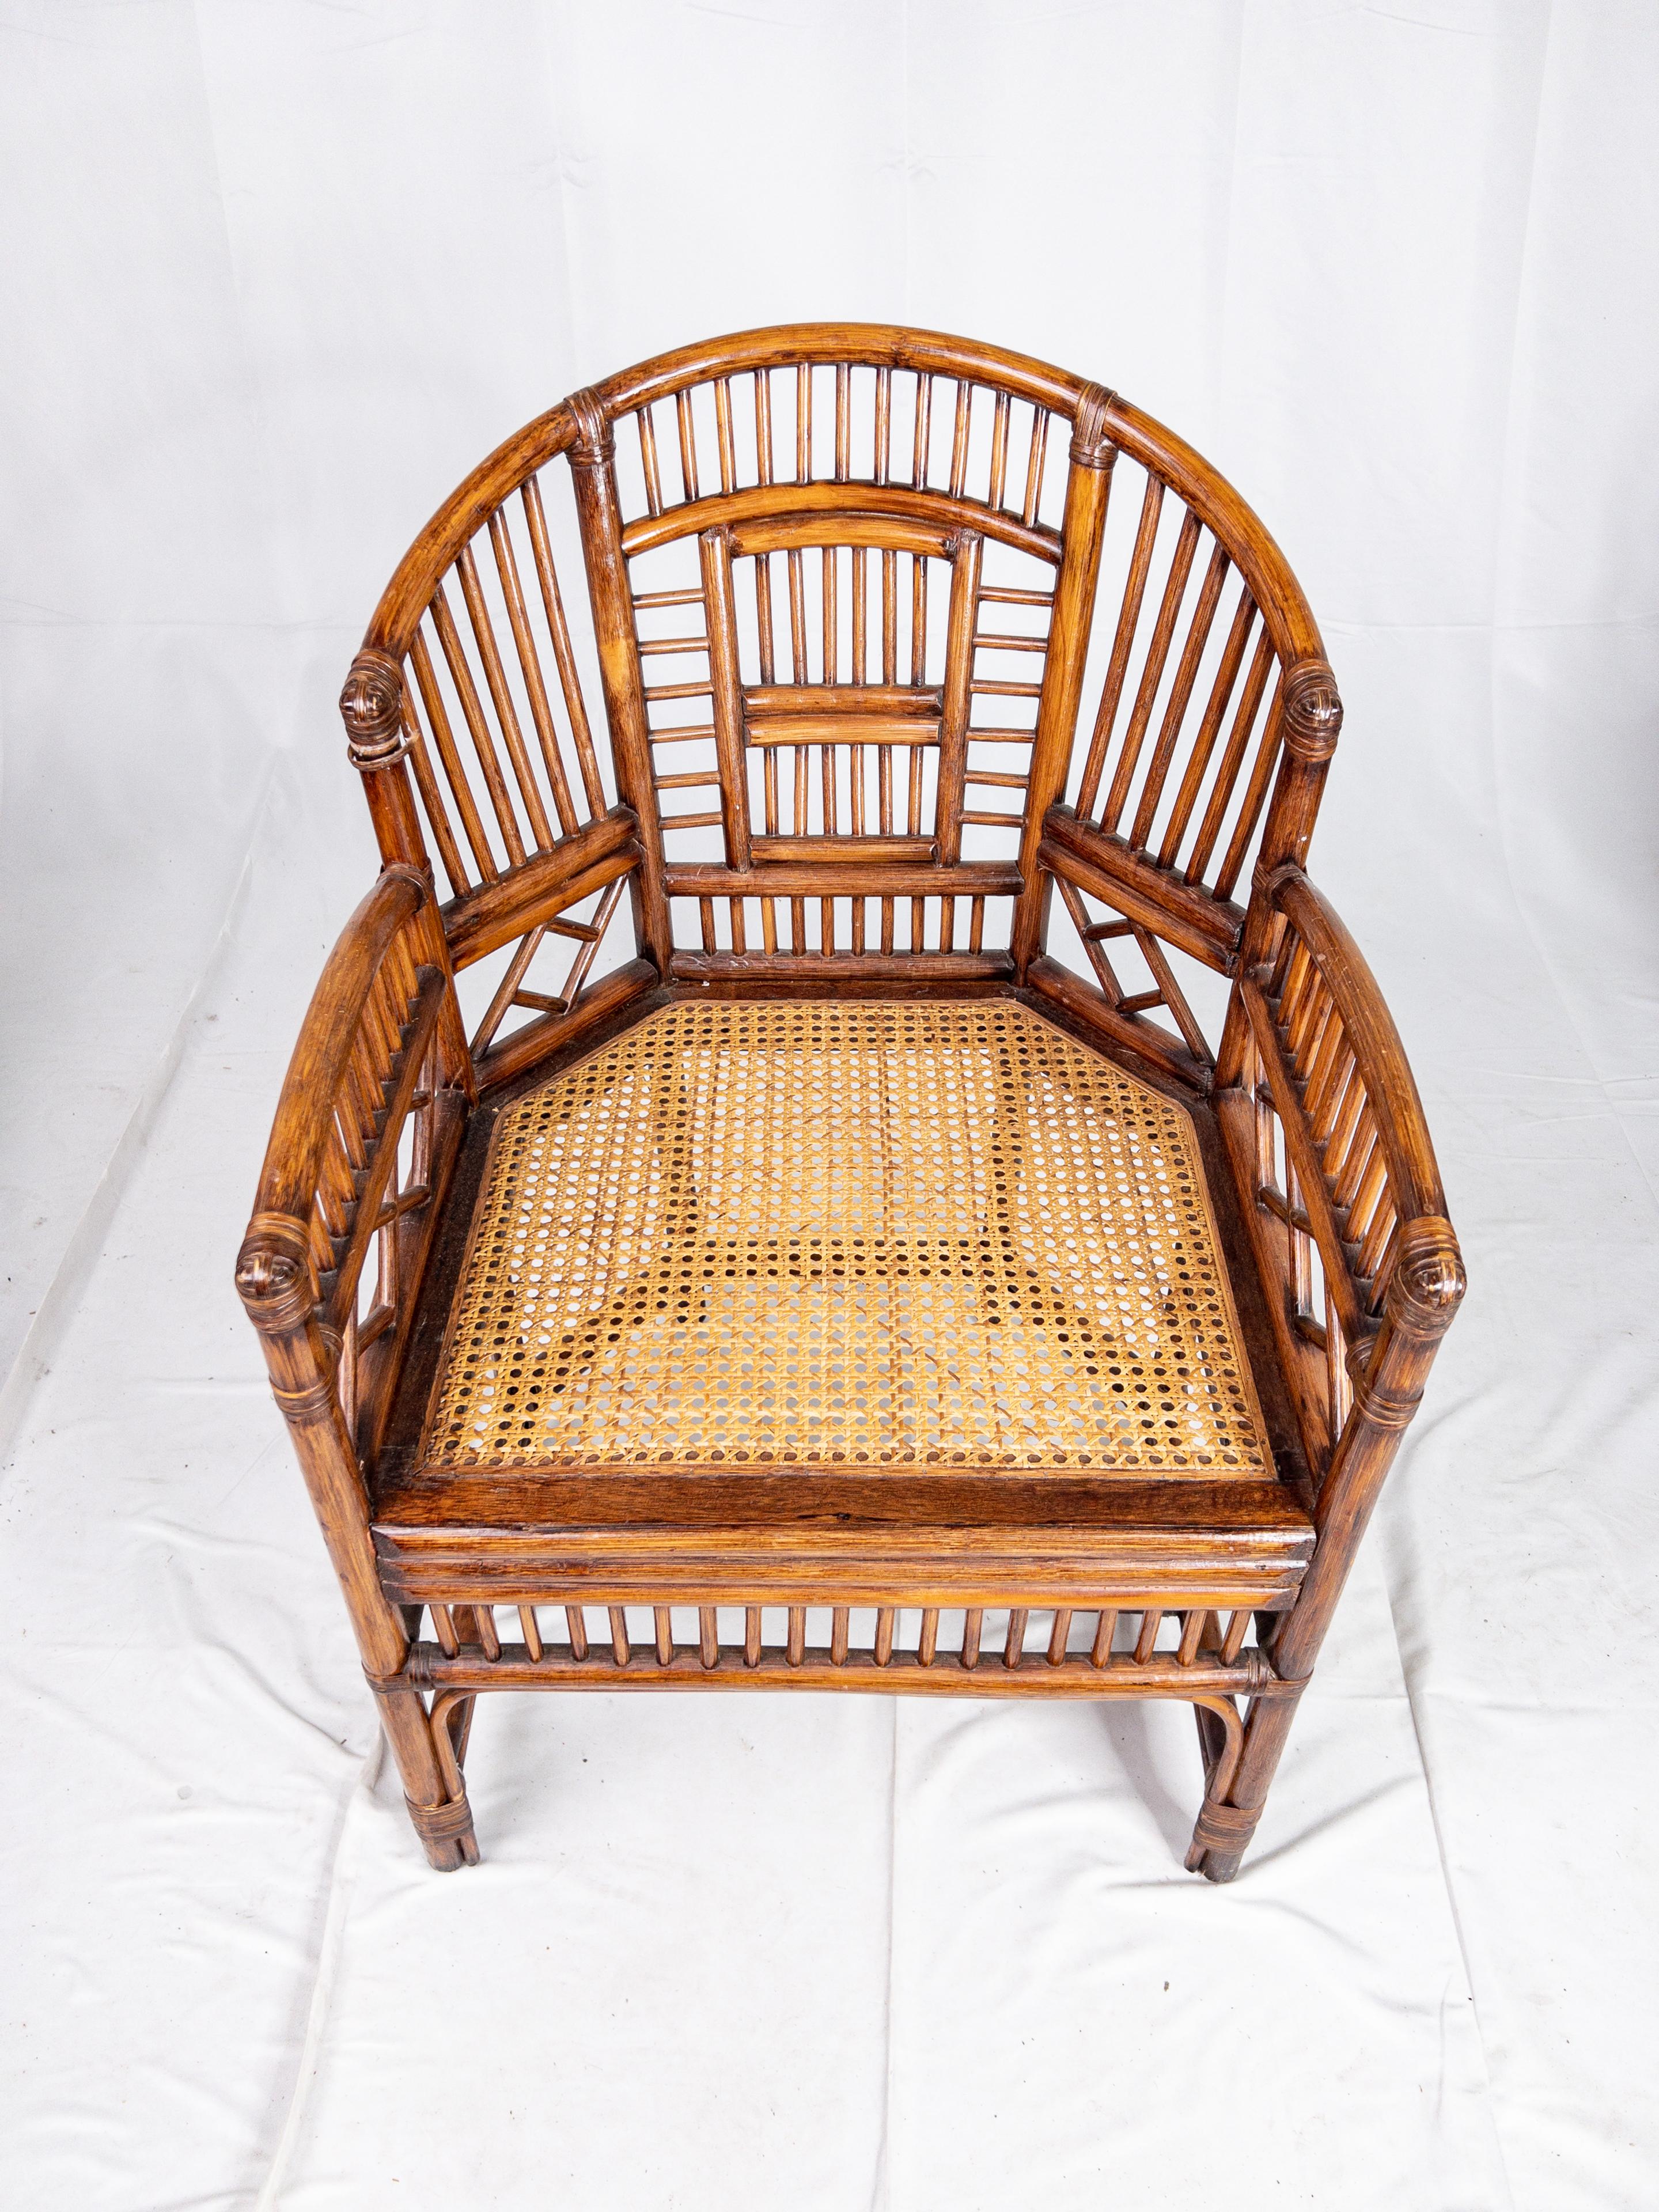 Hand-Crafted Vintage Brighton Scorched Bamboo Chippendale Chair with Rattan Seats